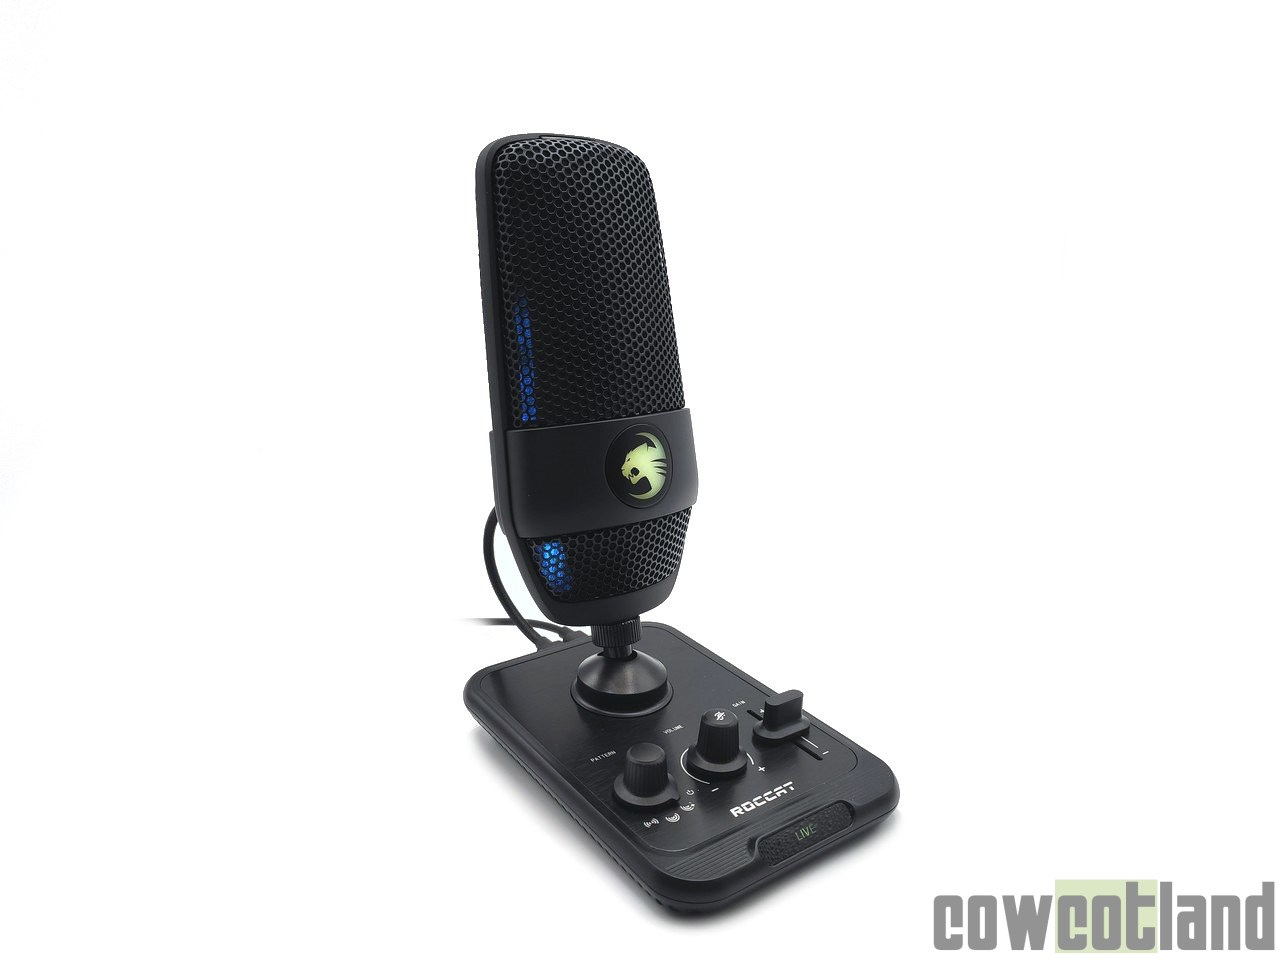 Image 45866, galerie Test micro ROCCAT Torch : ROCCAT se lance dans le micro gaming et streaming 